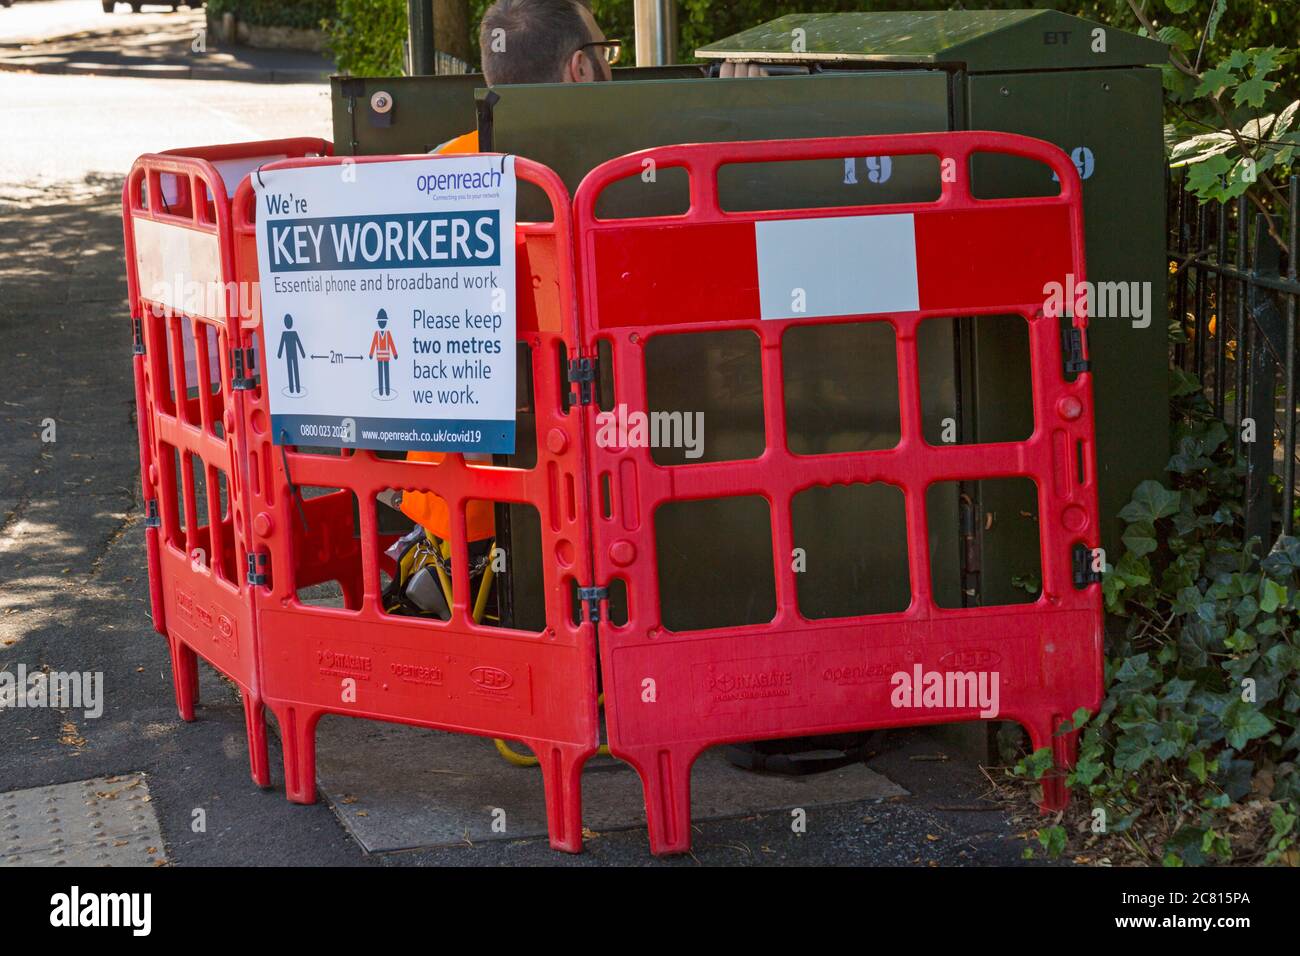 Openreach we're keyworkers essential phone and broadband work please keep two metres back while we work sign at Bournemouth, Dorset UK in July Stock Photo